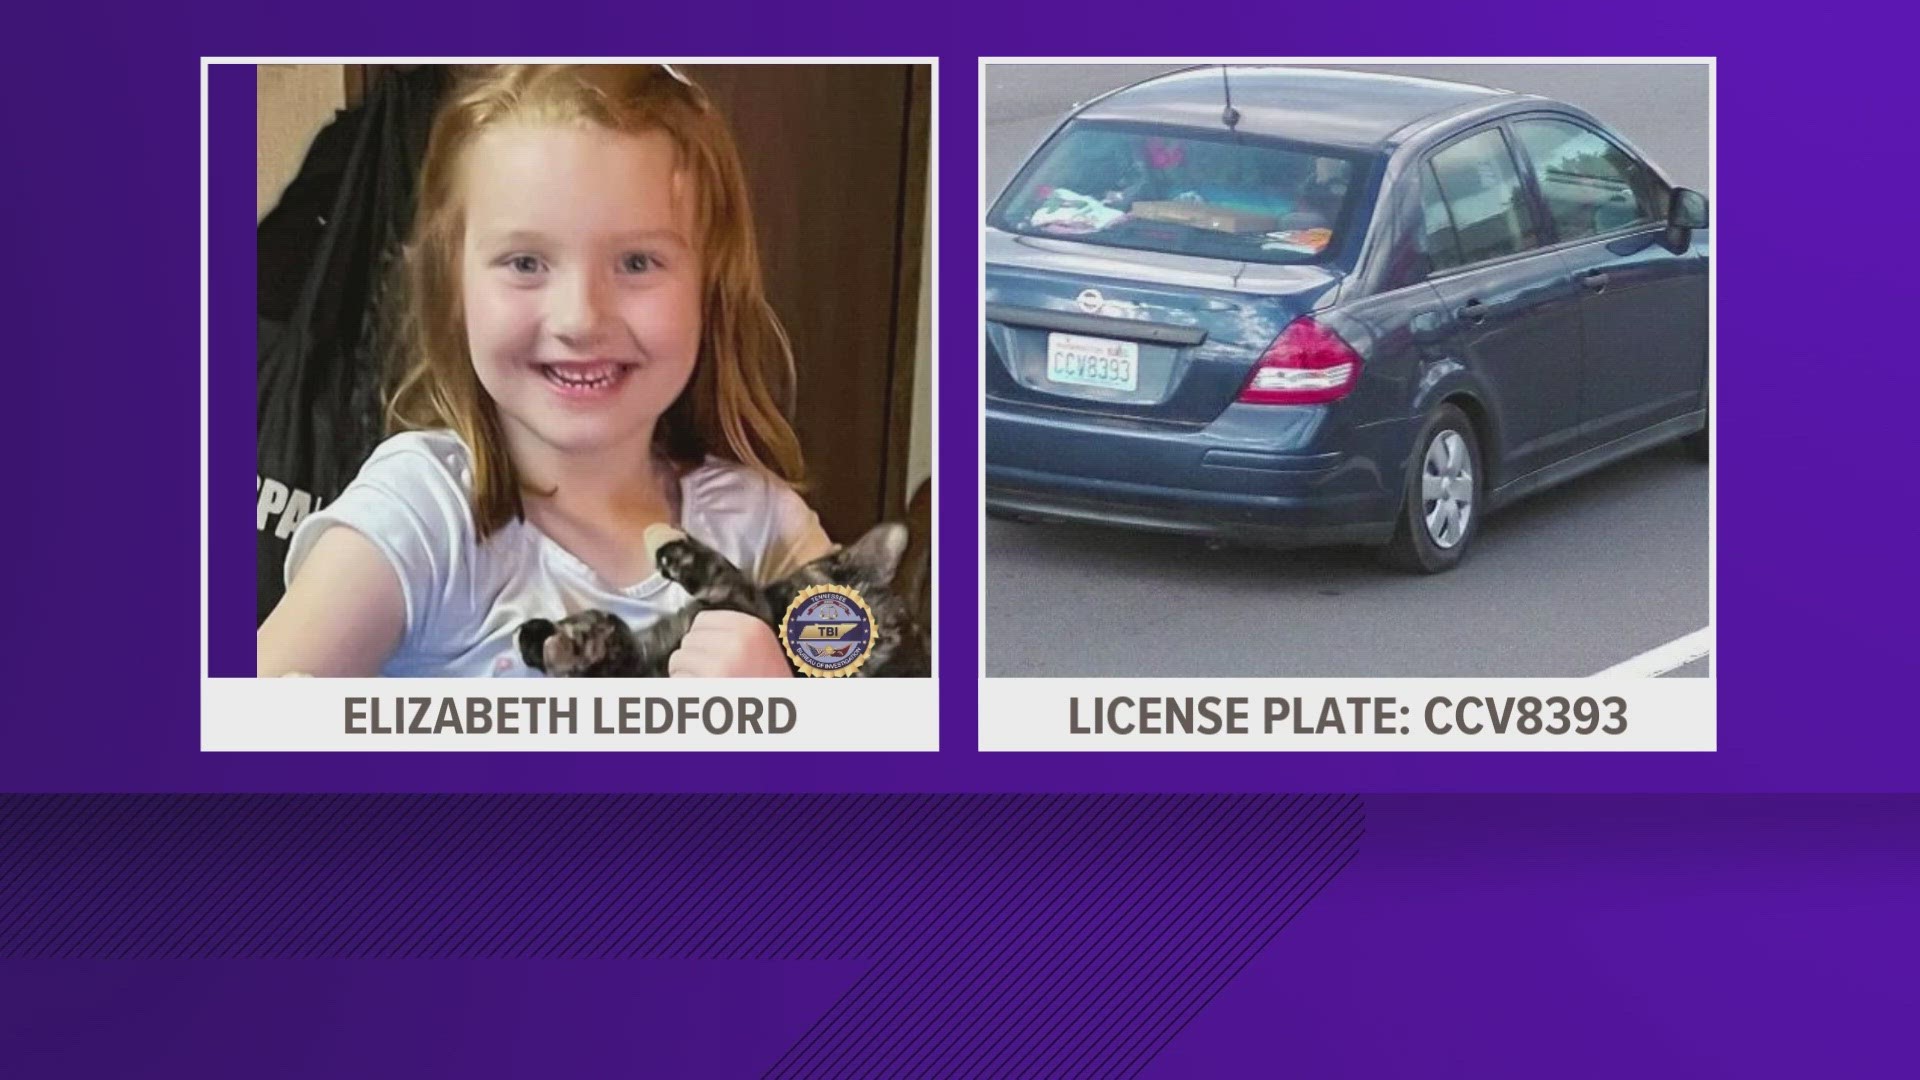 Elizabeth Ledford may be traveling in a blue 2009 Nissan Versa with the Washington state tag CCV8393, according to the Tennessee Bureau of Investigation.